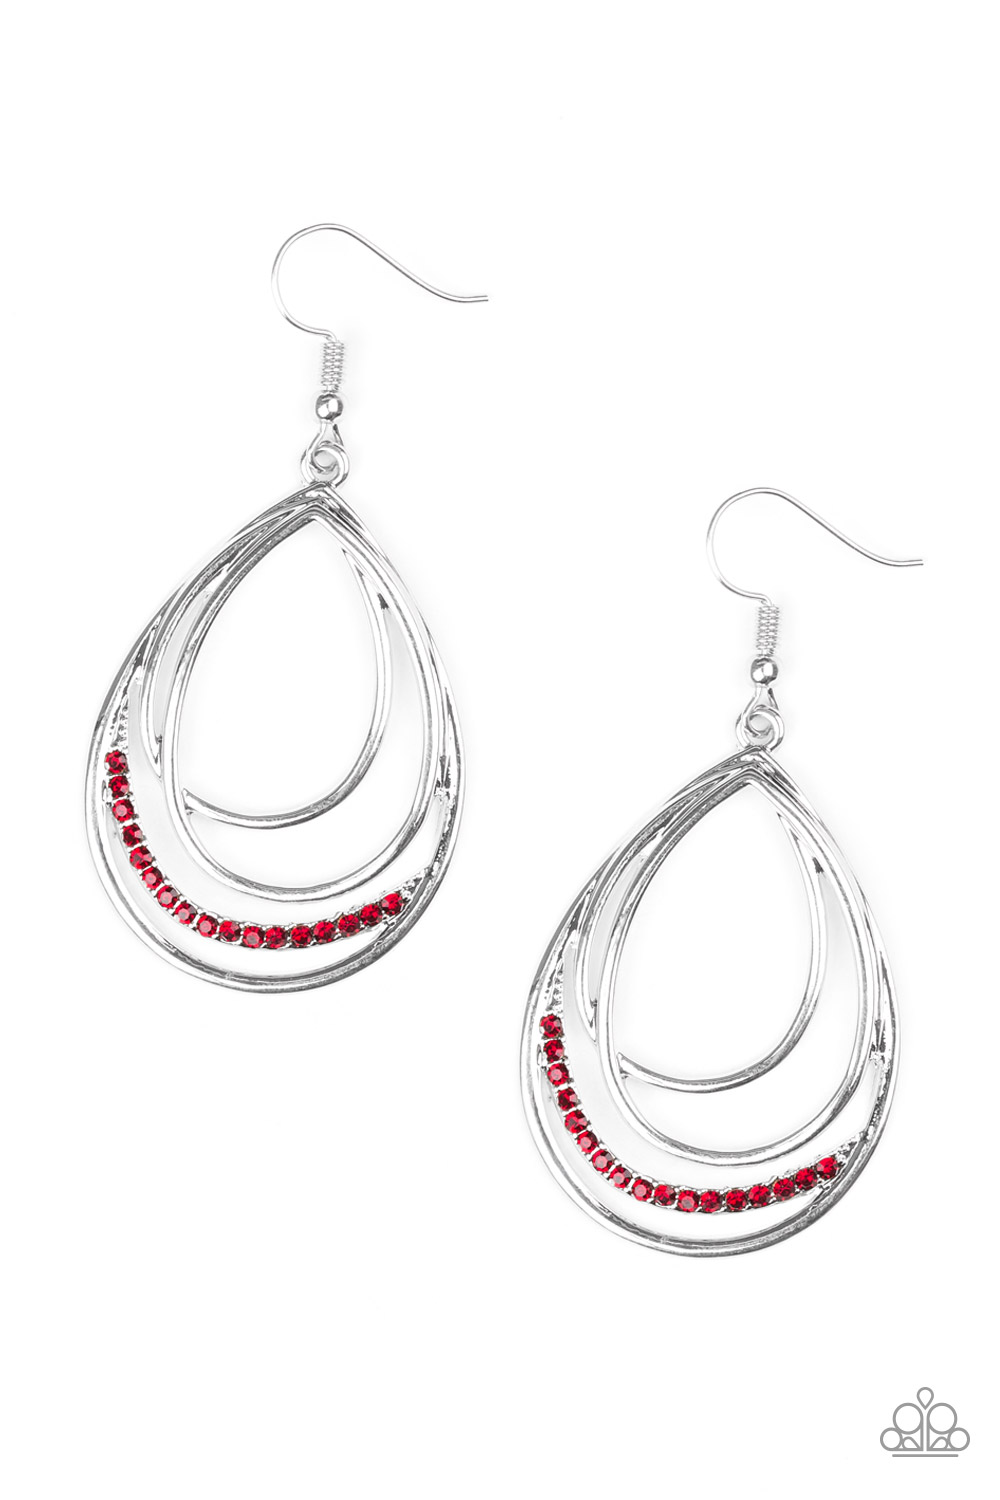 Paparazzi Accessories: Start Each Day With Sparkle - Red | Paparazzi ...